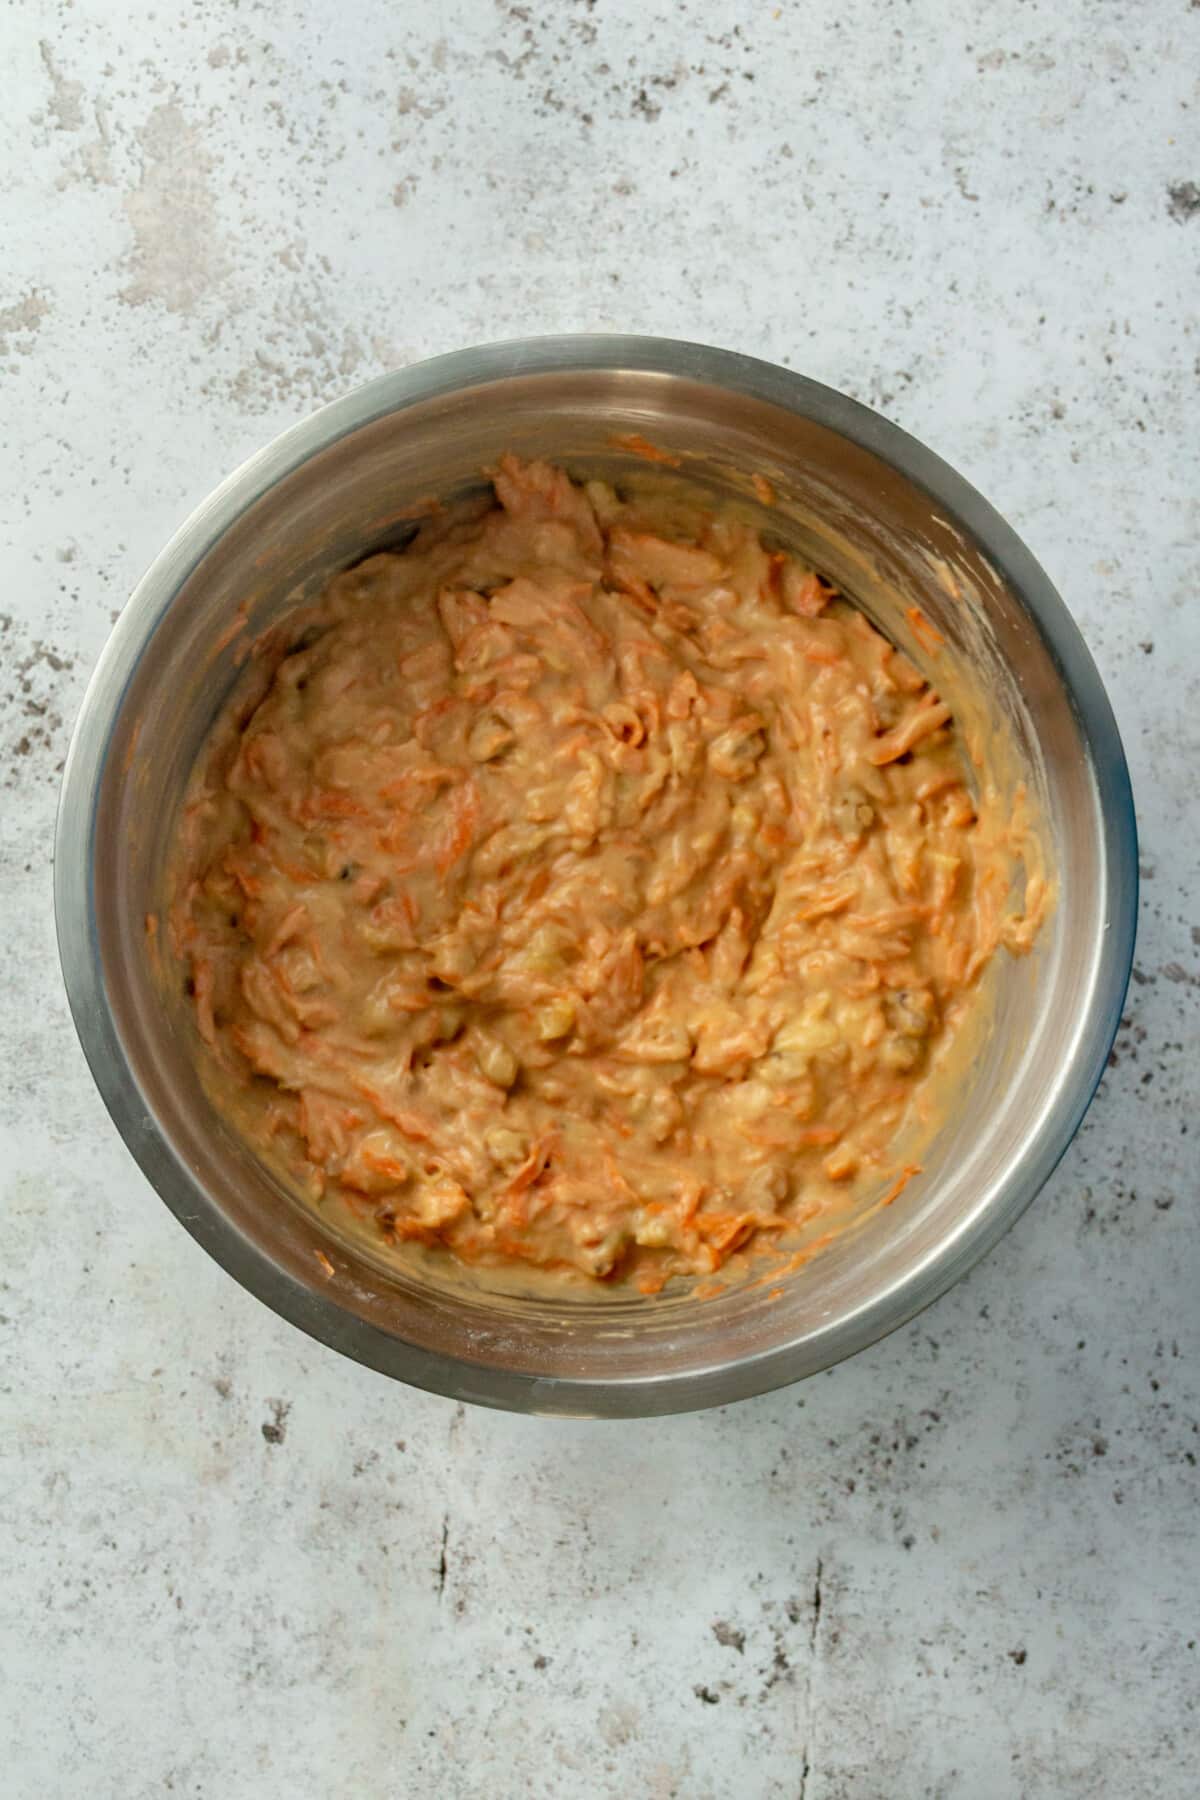 Carrot cake batter sits in a large metal mixing bowl.